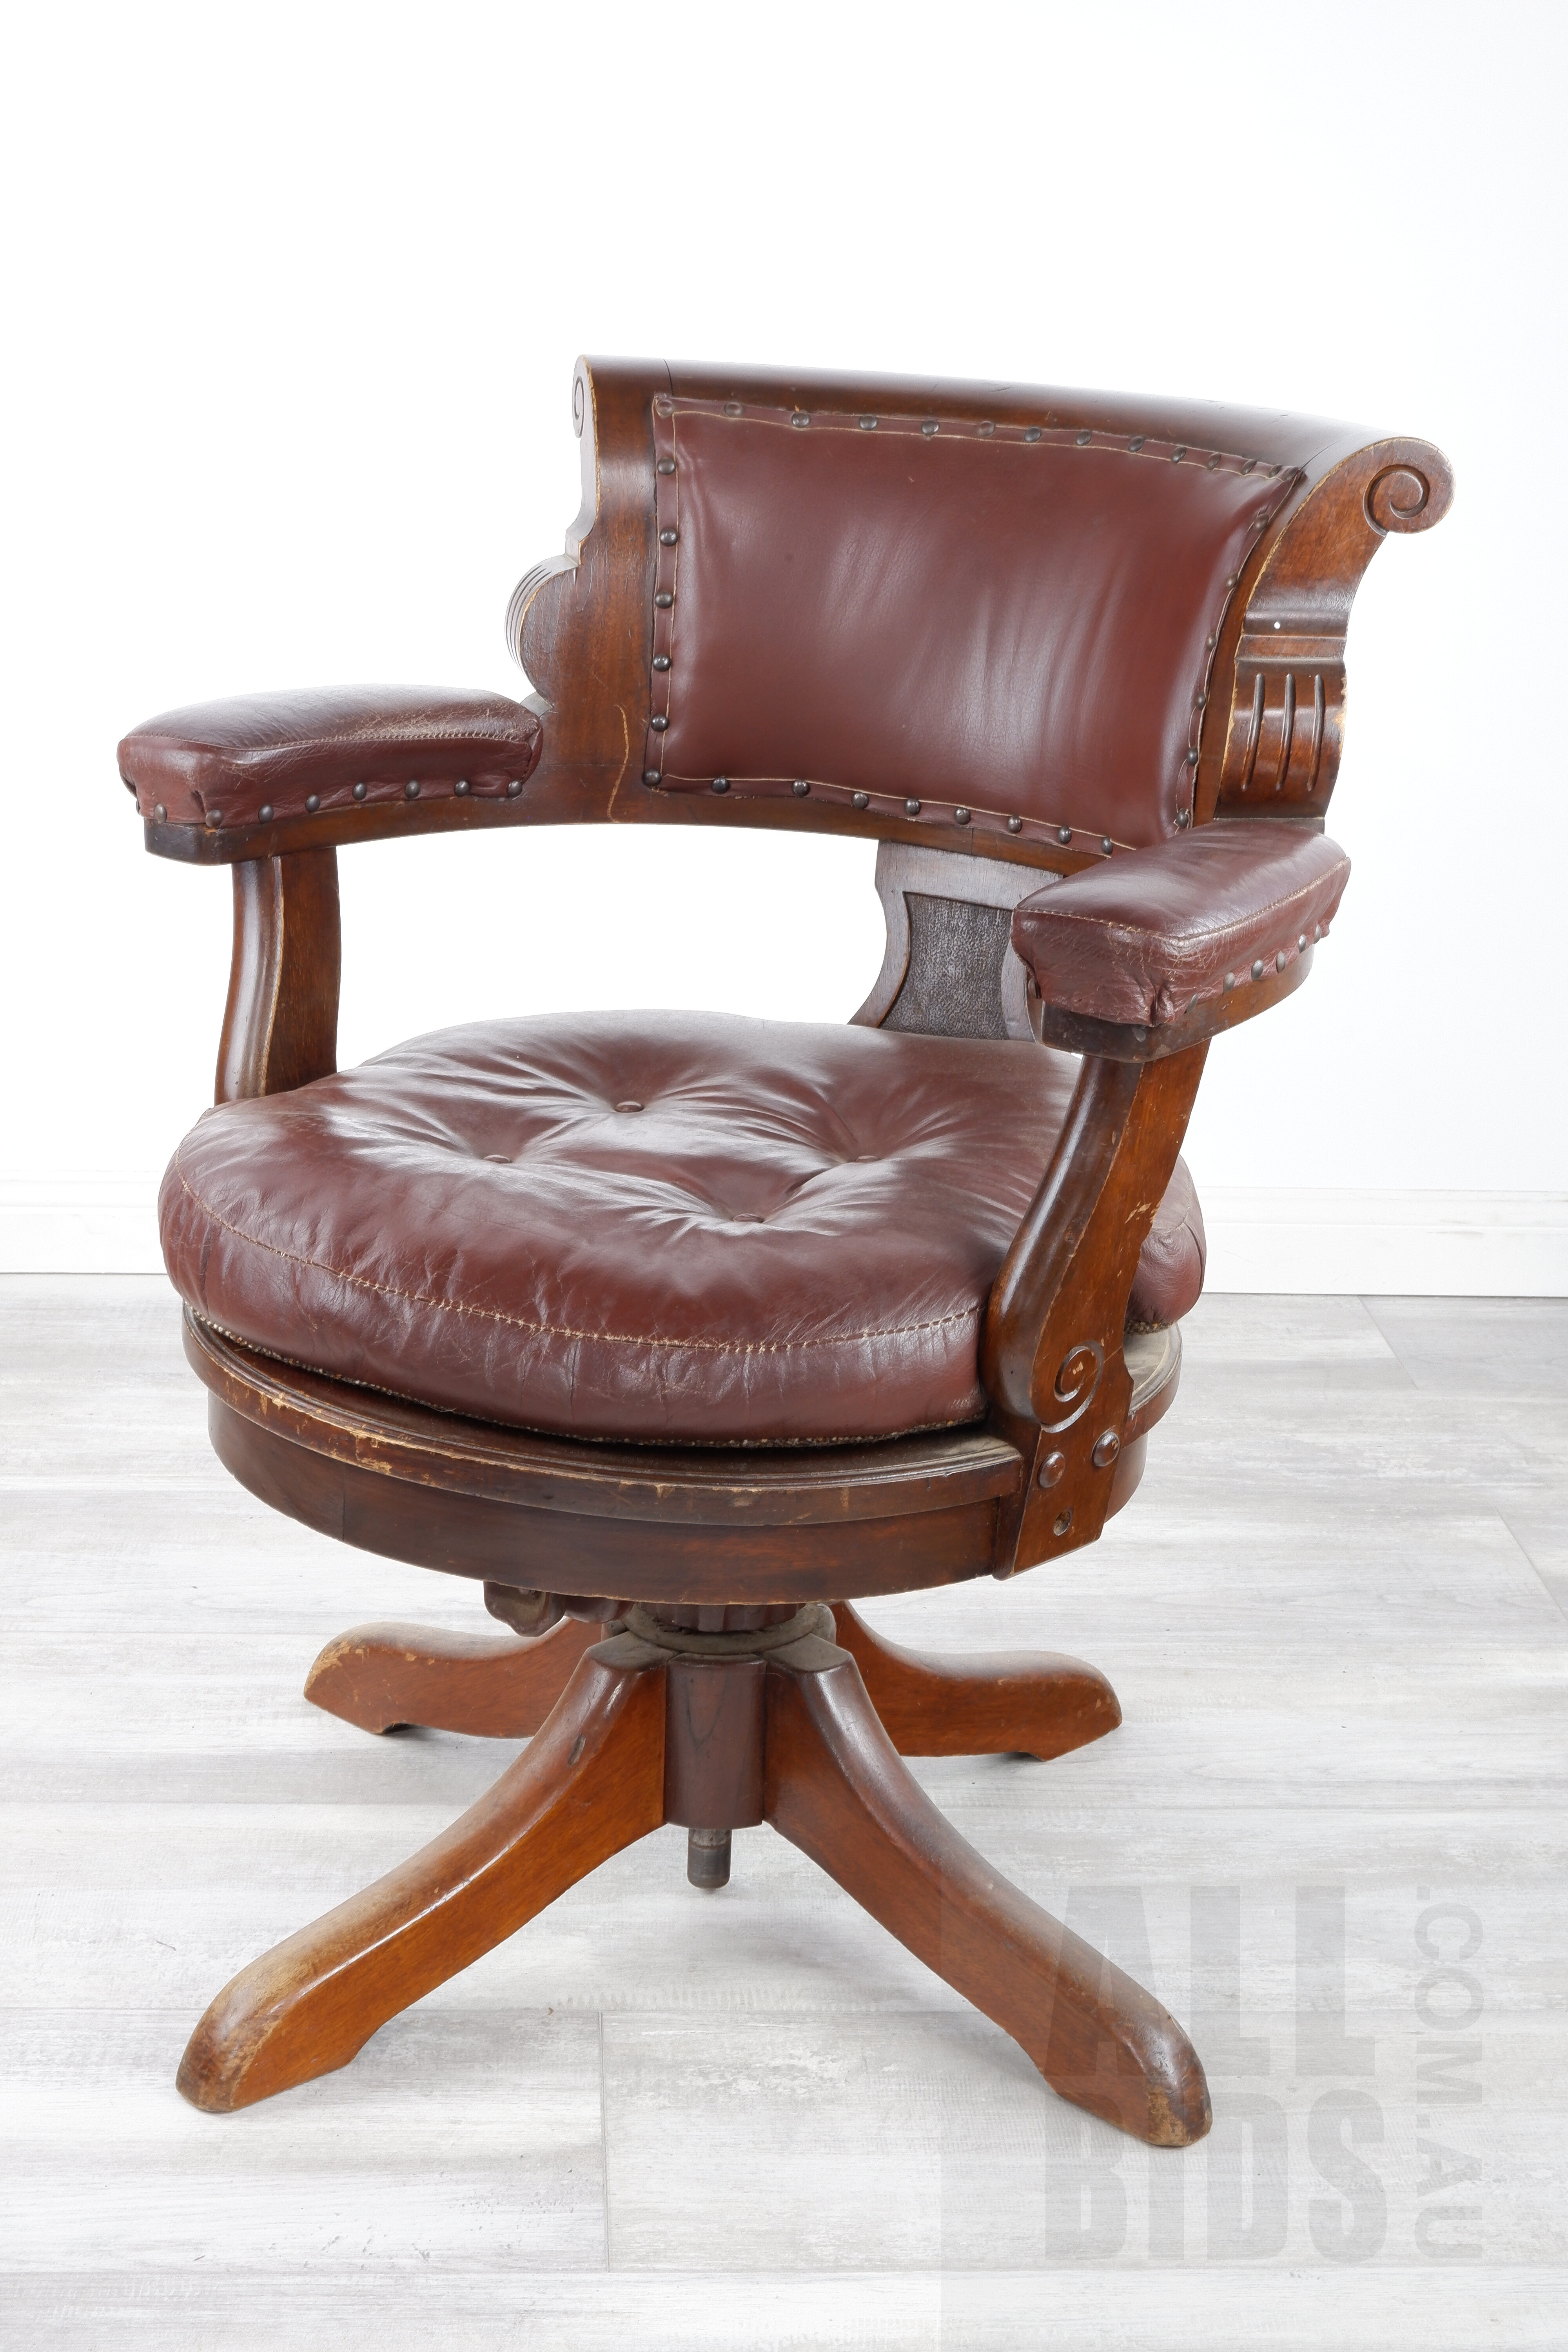 'Ex Commonwealth Government Tasmanian Blackwood and Burgundy Leather Chair, Possibly From Old Parliament House'